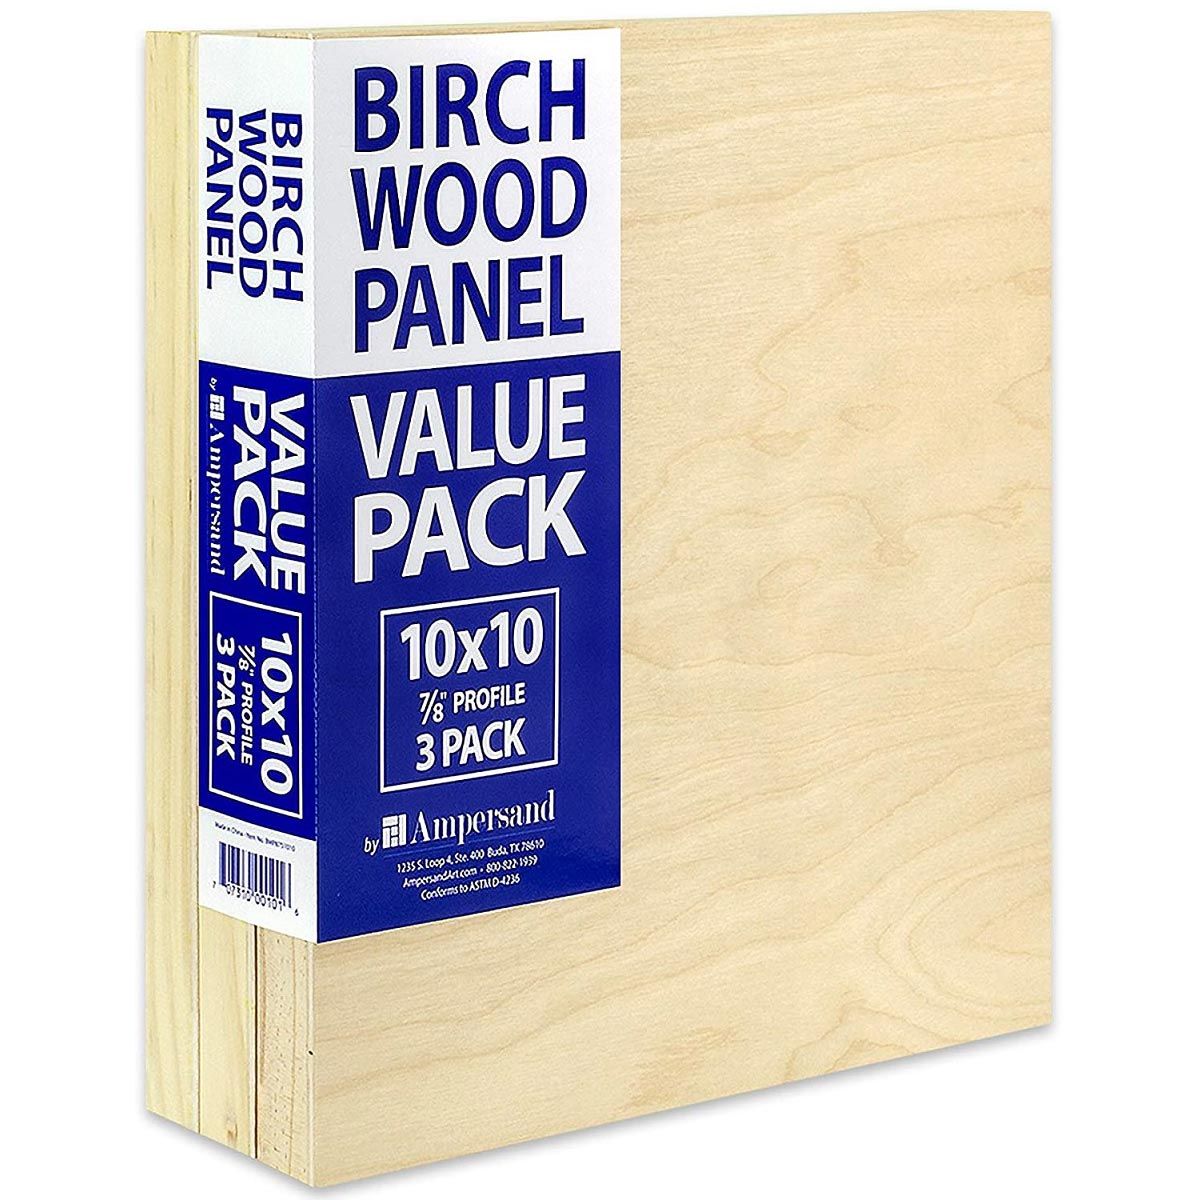 Ampersand Birch Wood 7/8" Panel, Value Pack 3-10 x 10 inches